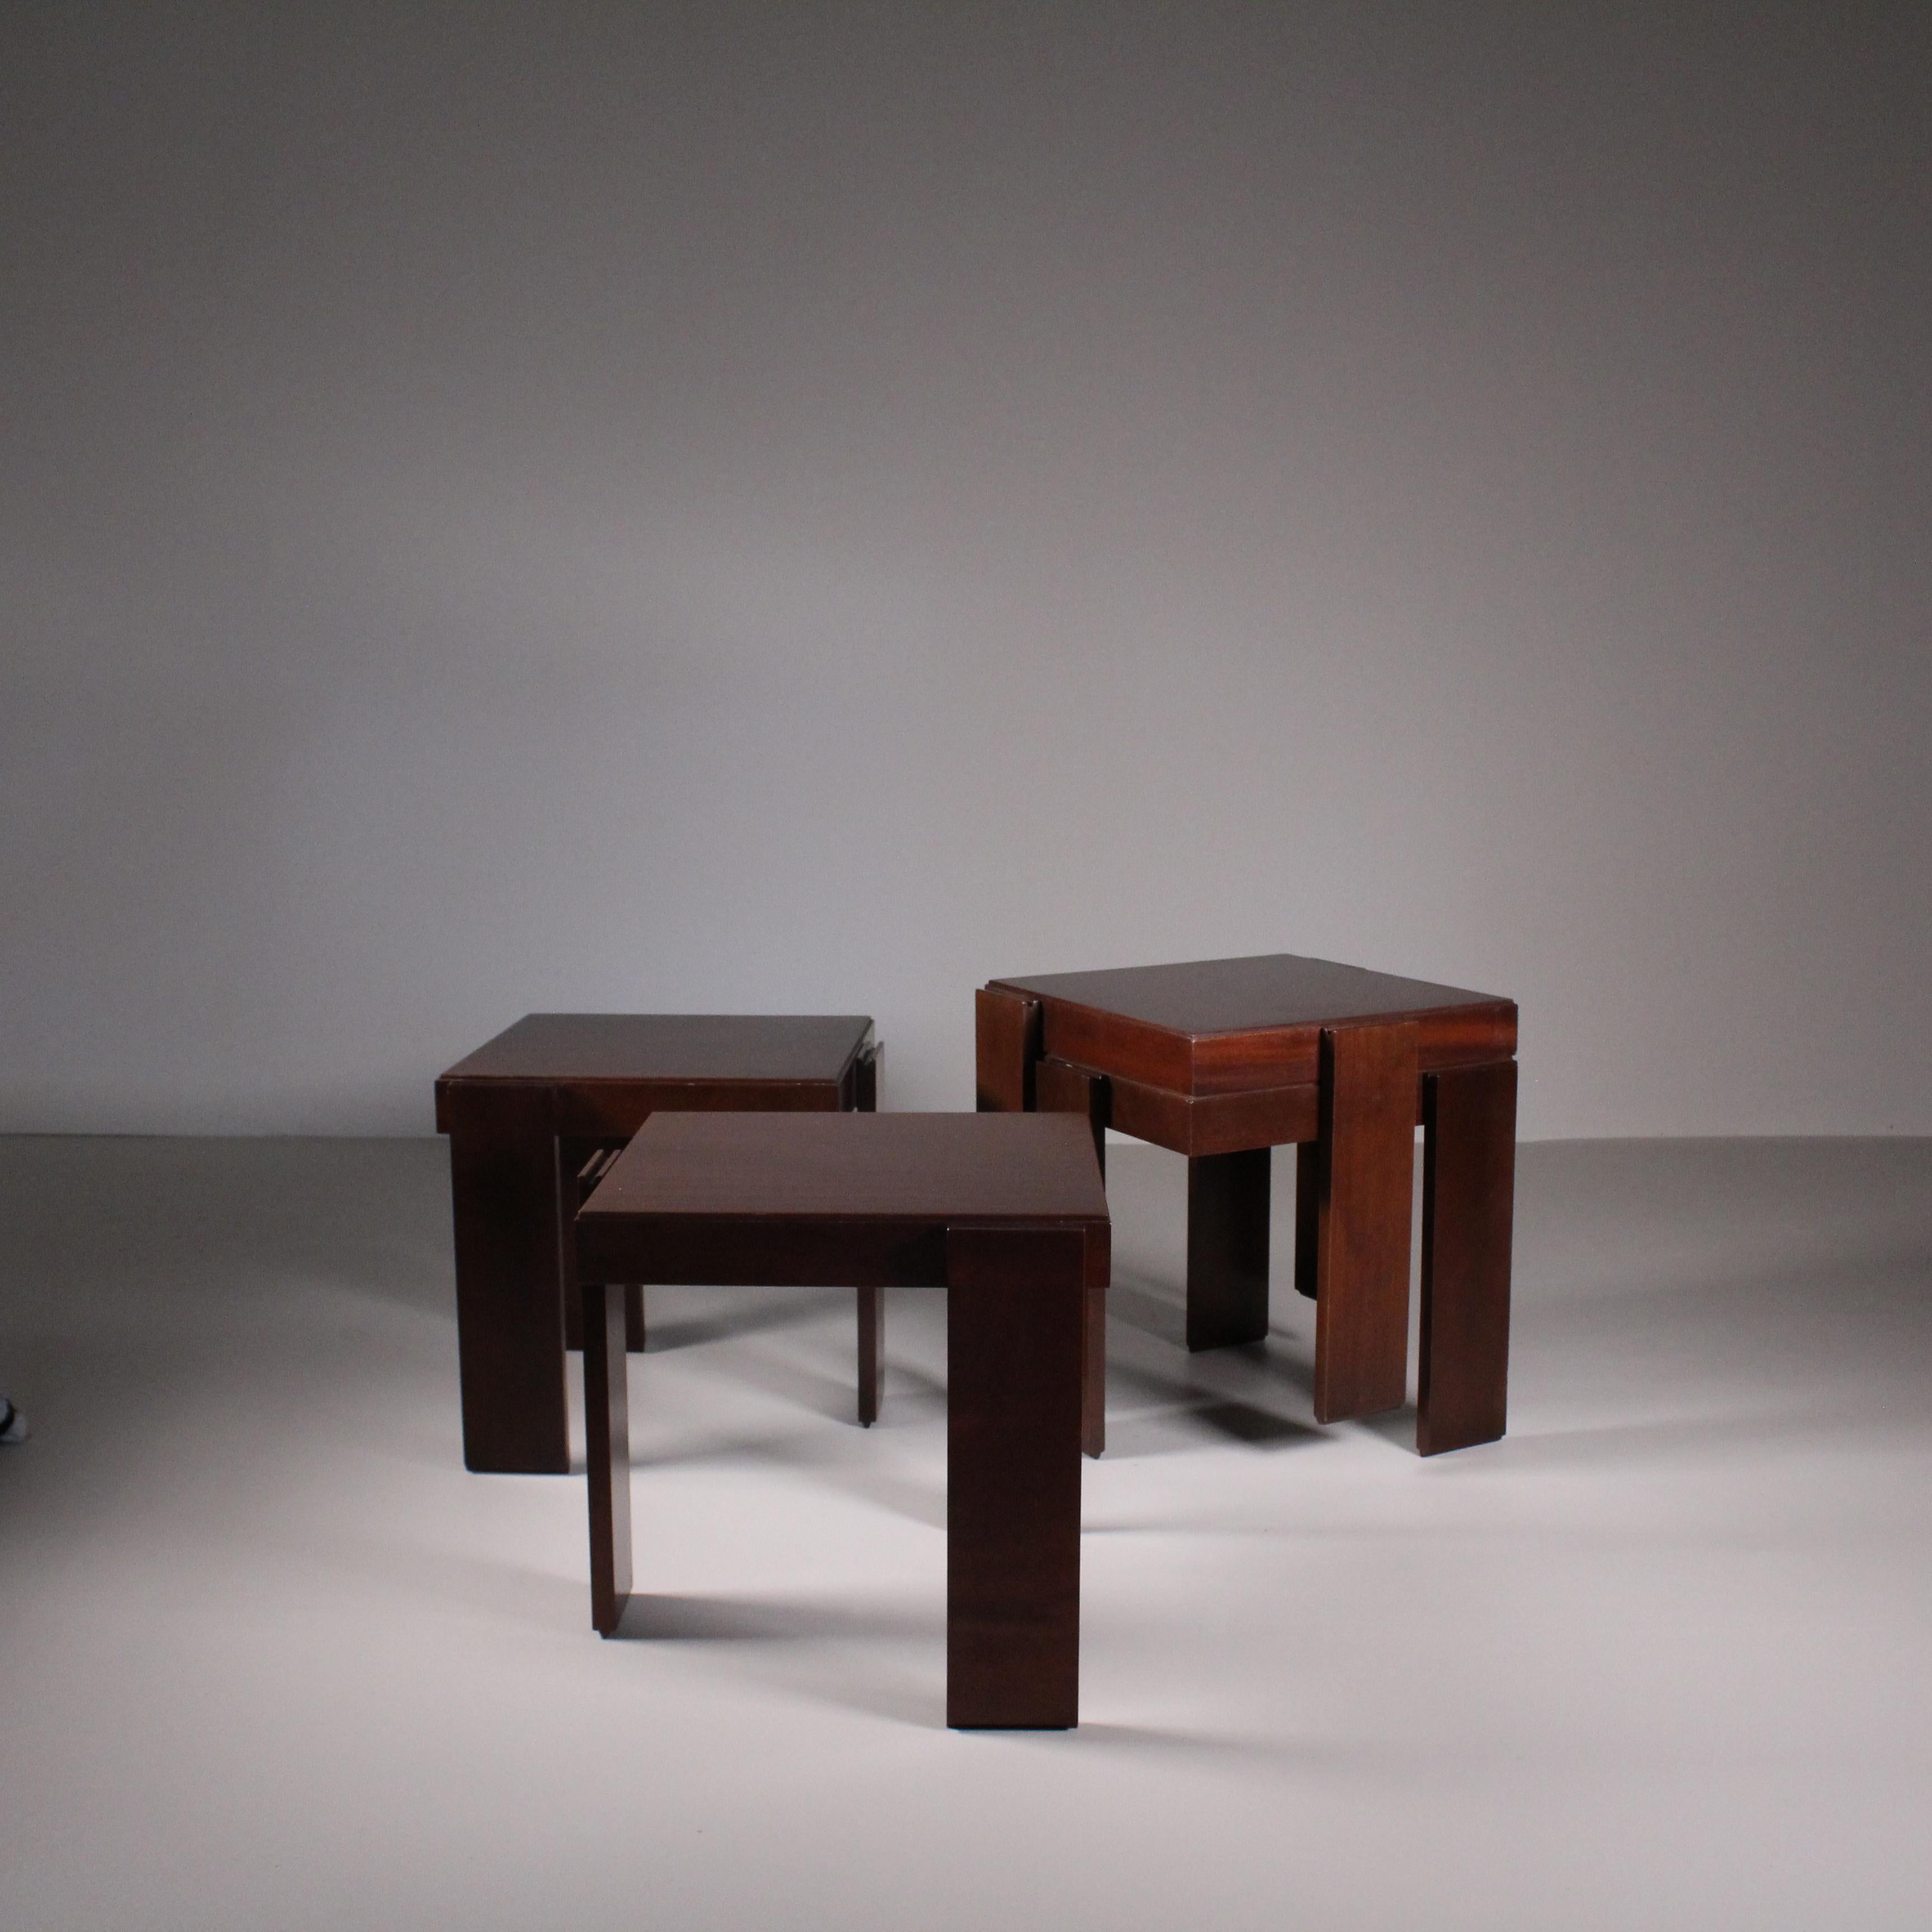 Modular Stackable Solid Wood Coffee, Side Tables by Frattini for Cassina 10